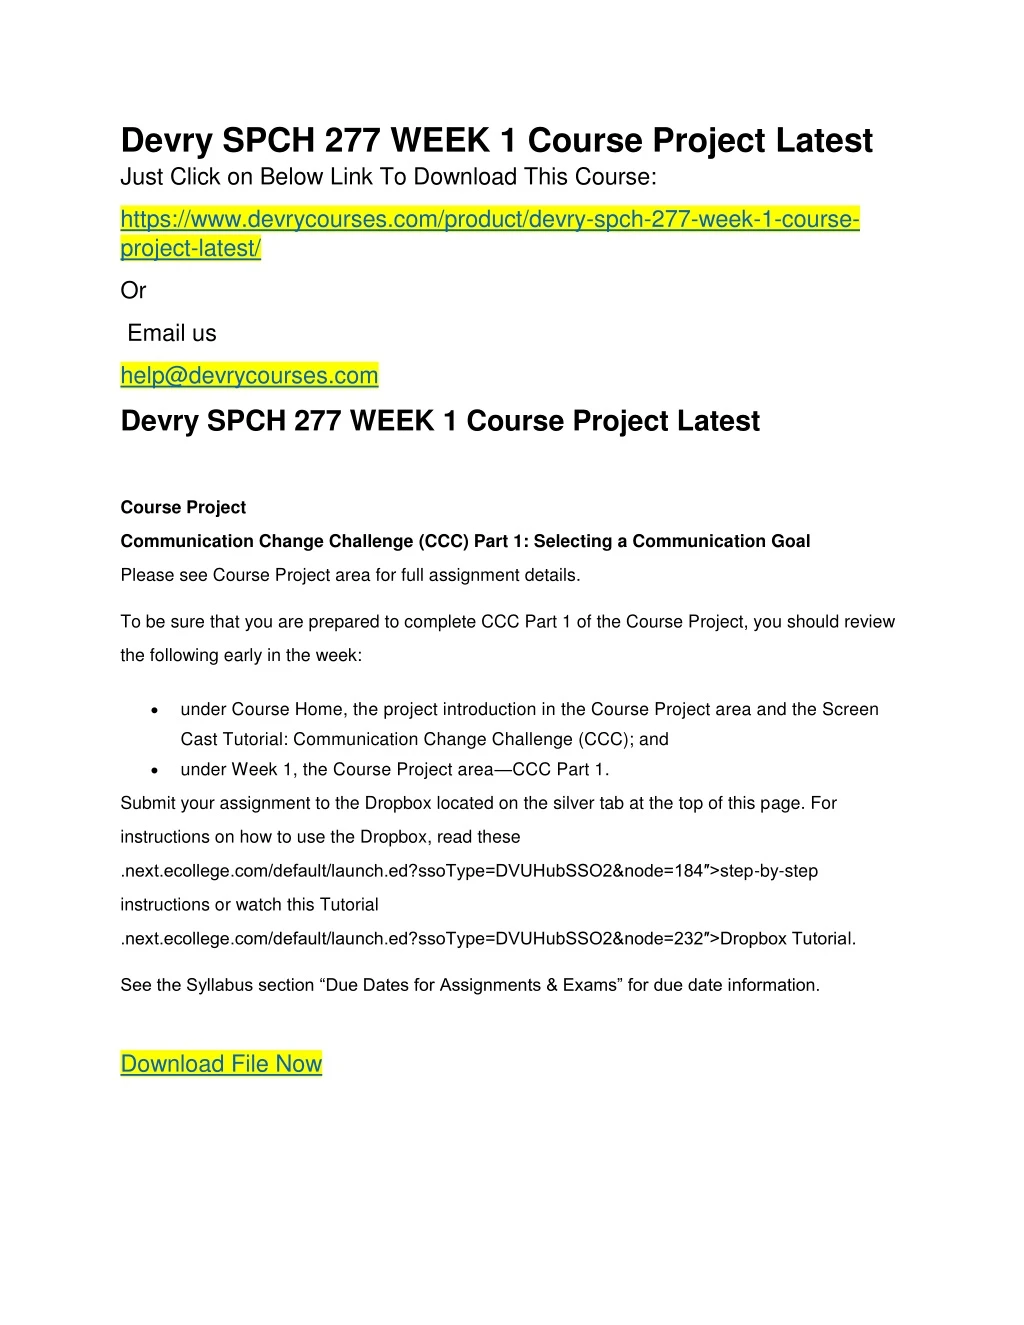 devry spch 277 week 1 course project latest just